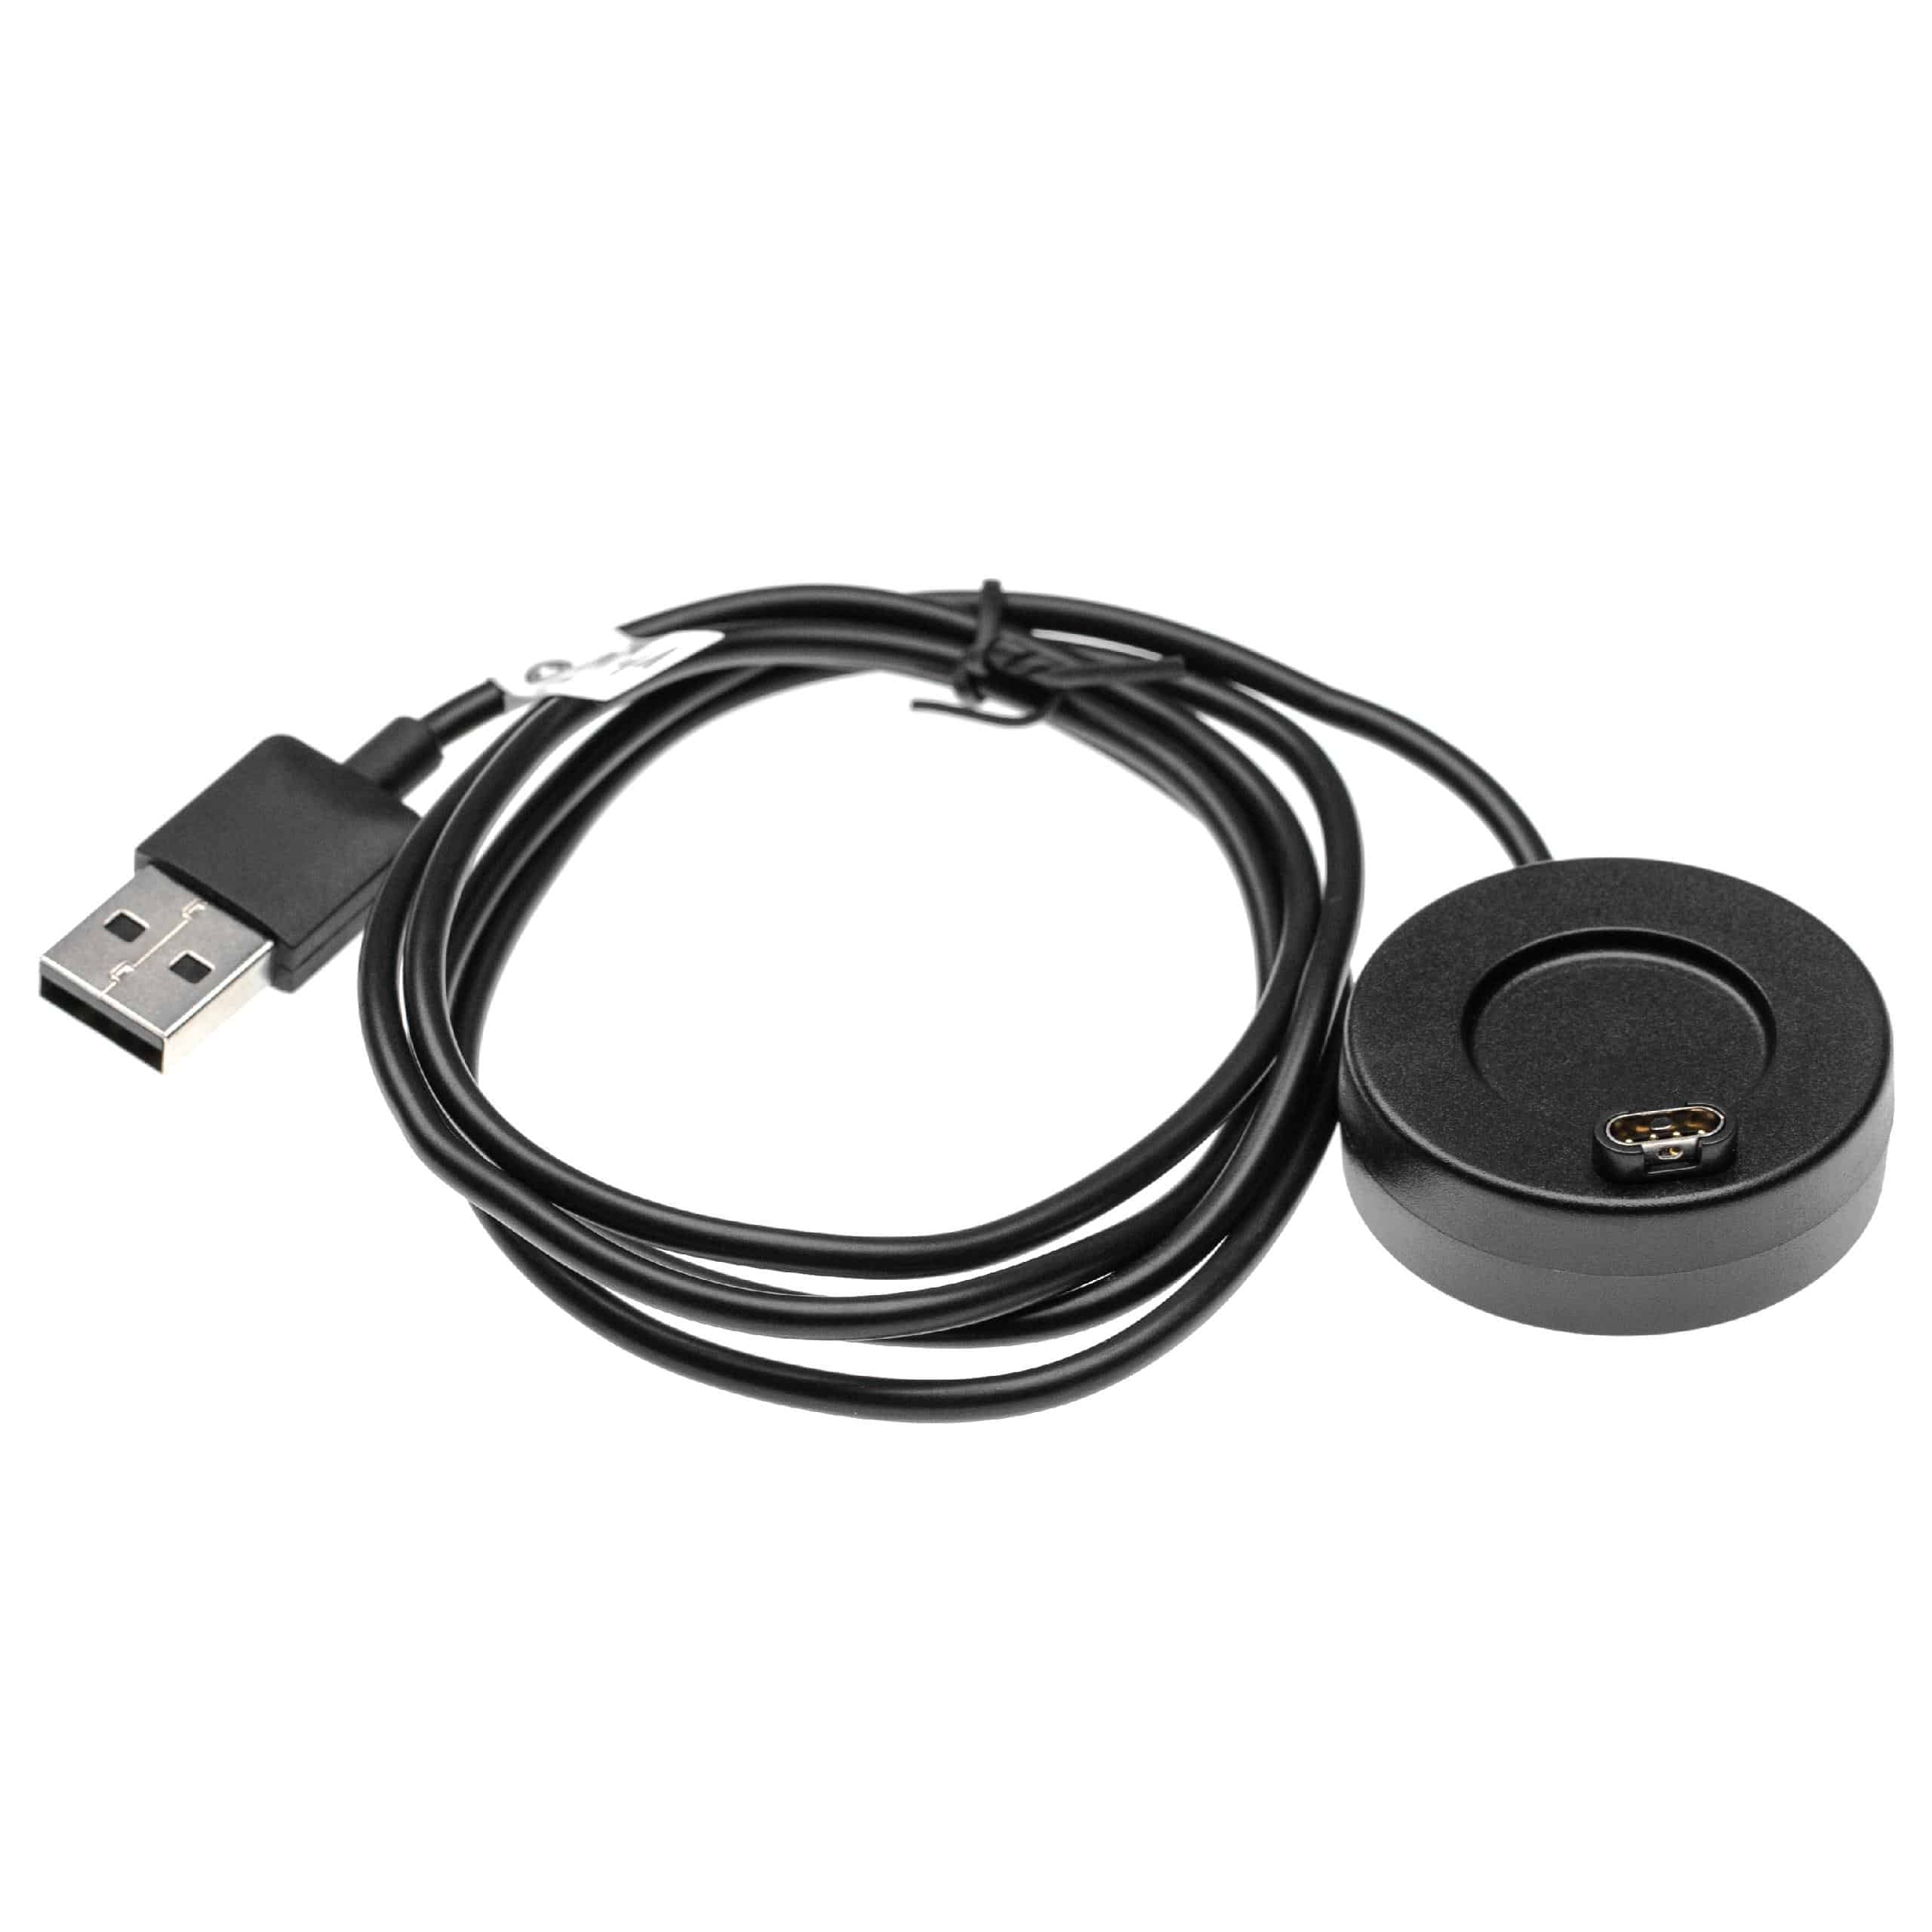 Charging Cable suitable for S60 Garmin Approach S60 Fitness Tracker - USB A Cable, 100cm, black